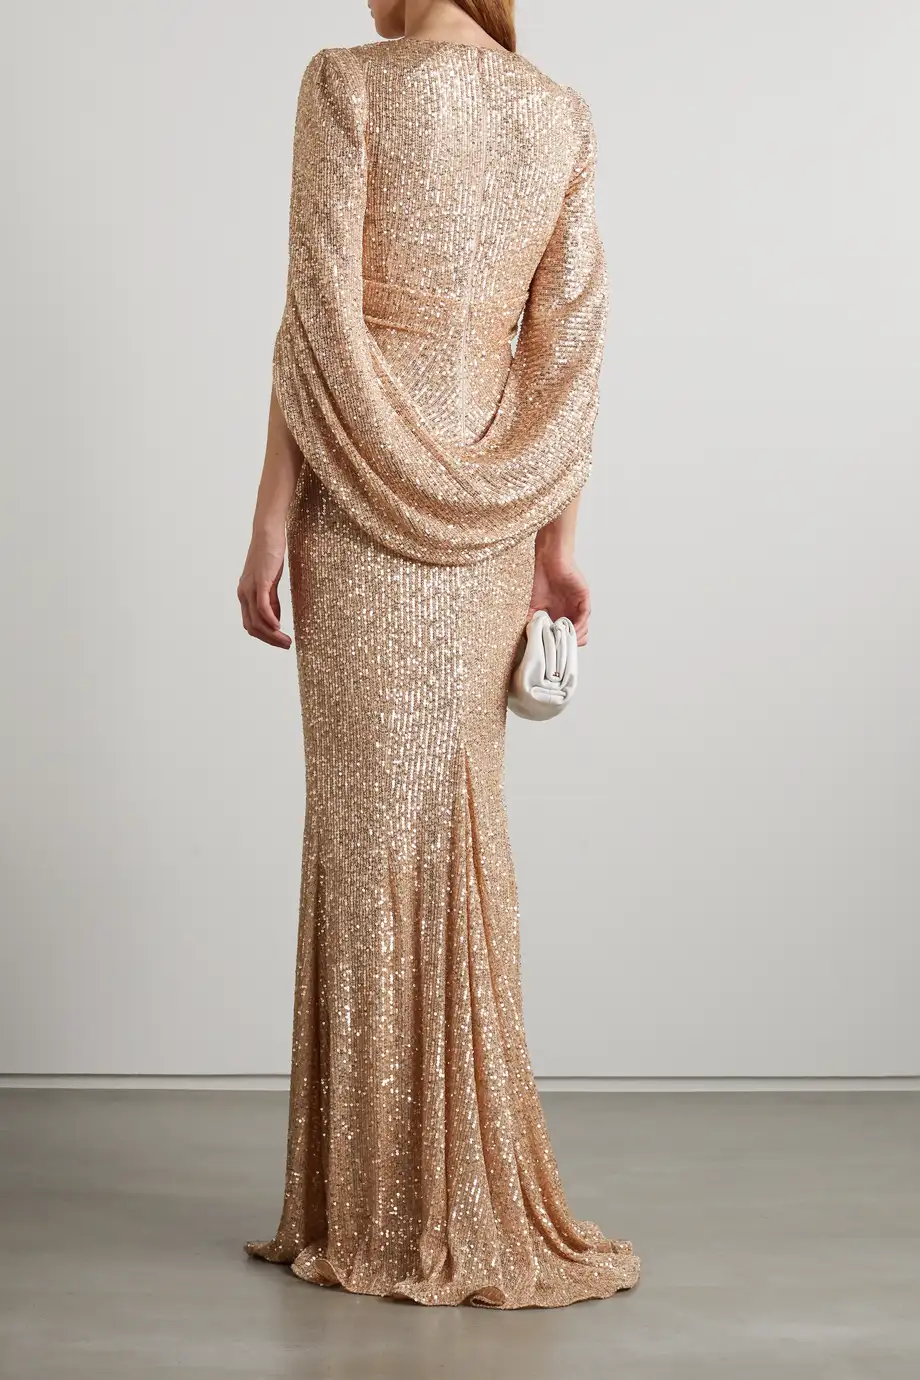 gold sequin dress - back view with cape style arms